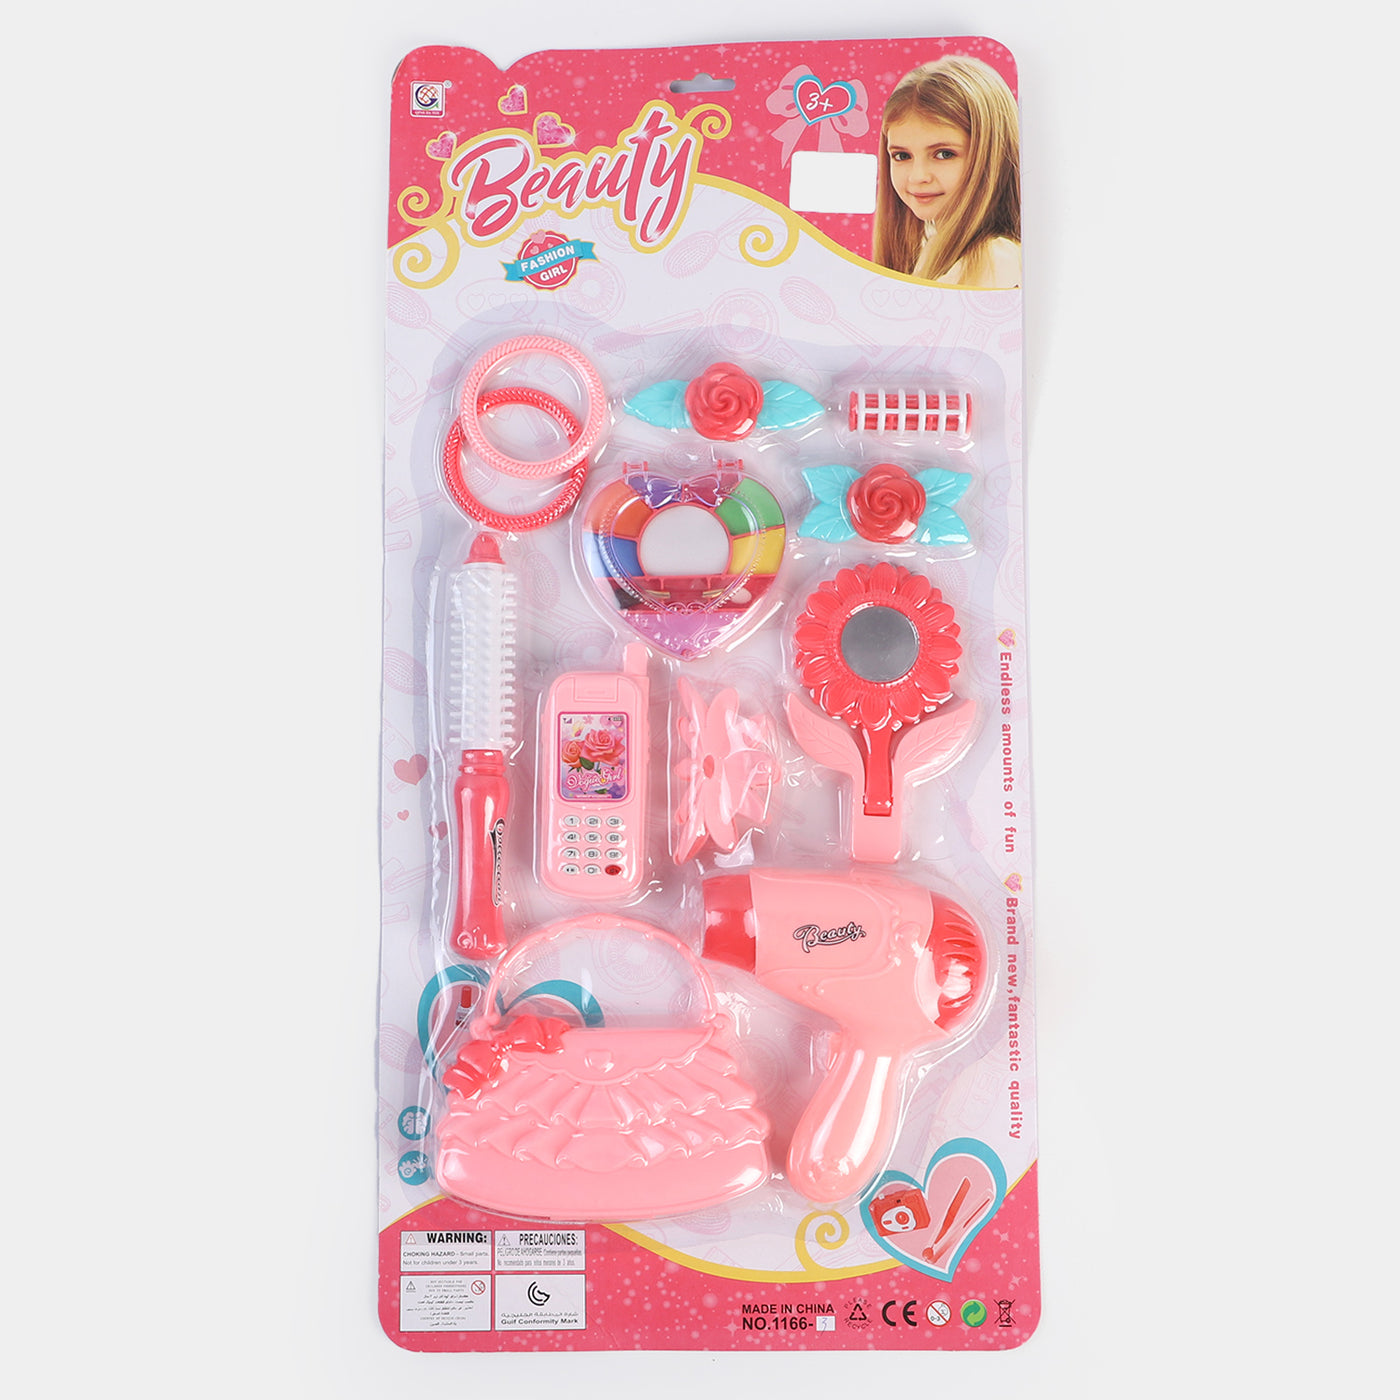 Beauty Card Toy Play Set For Girls